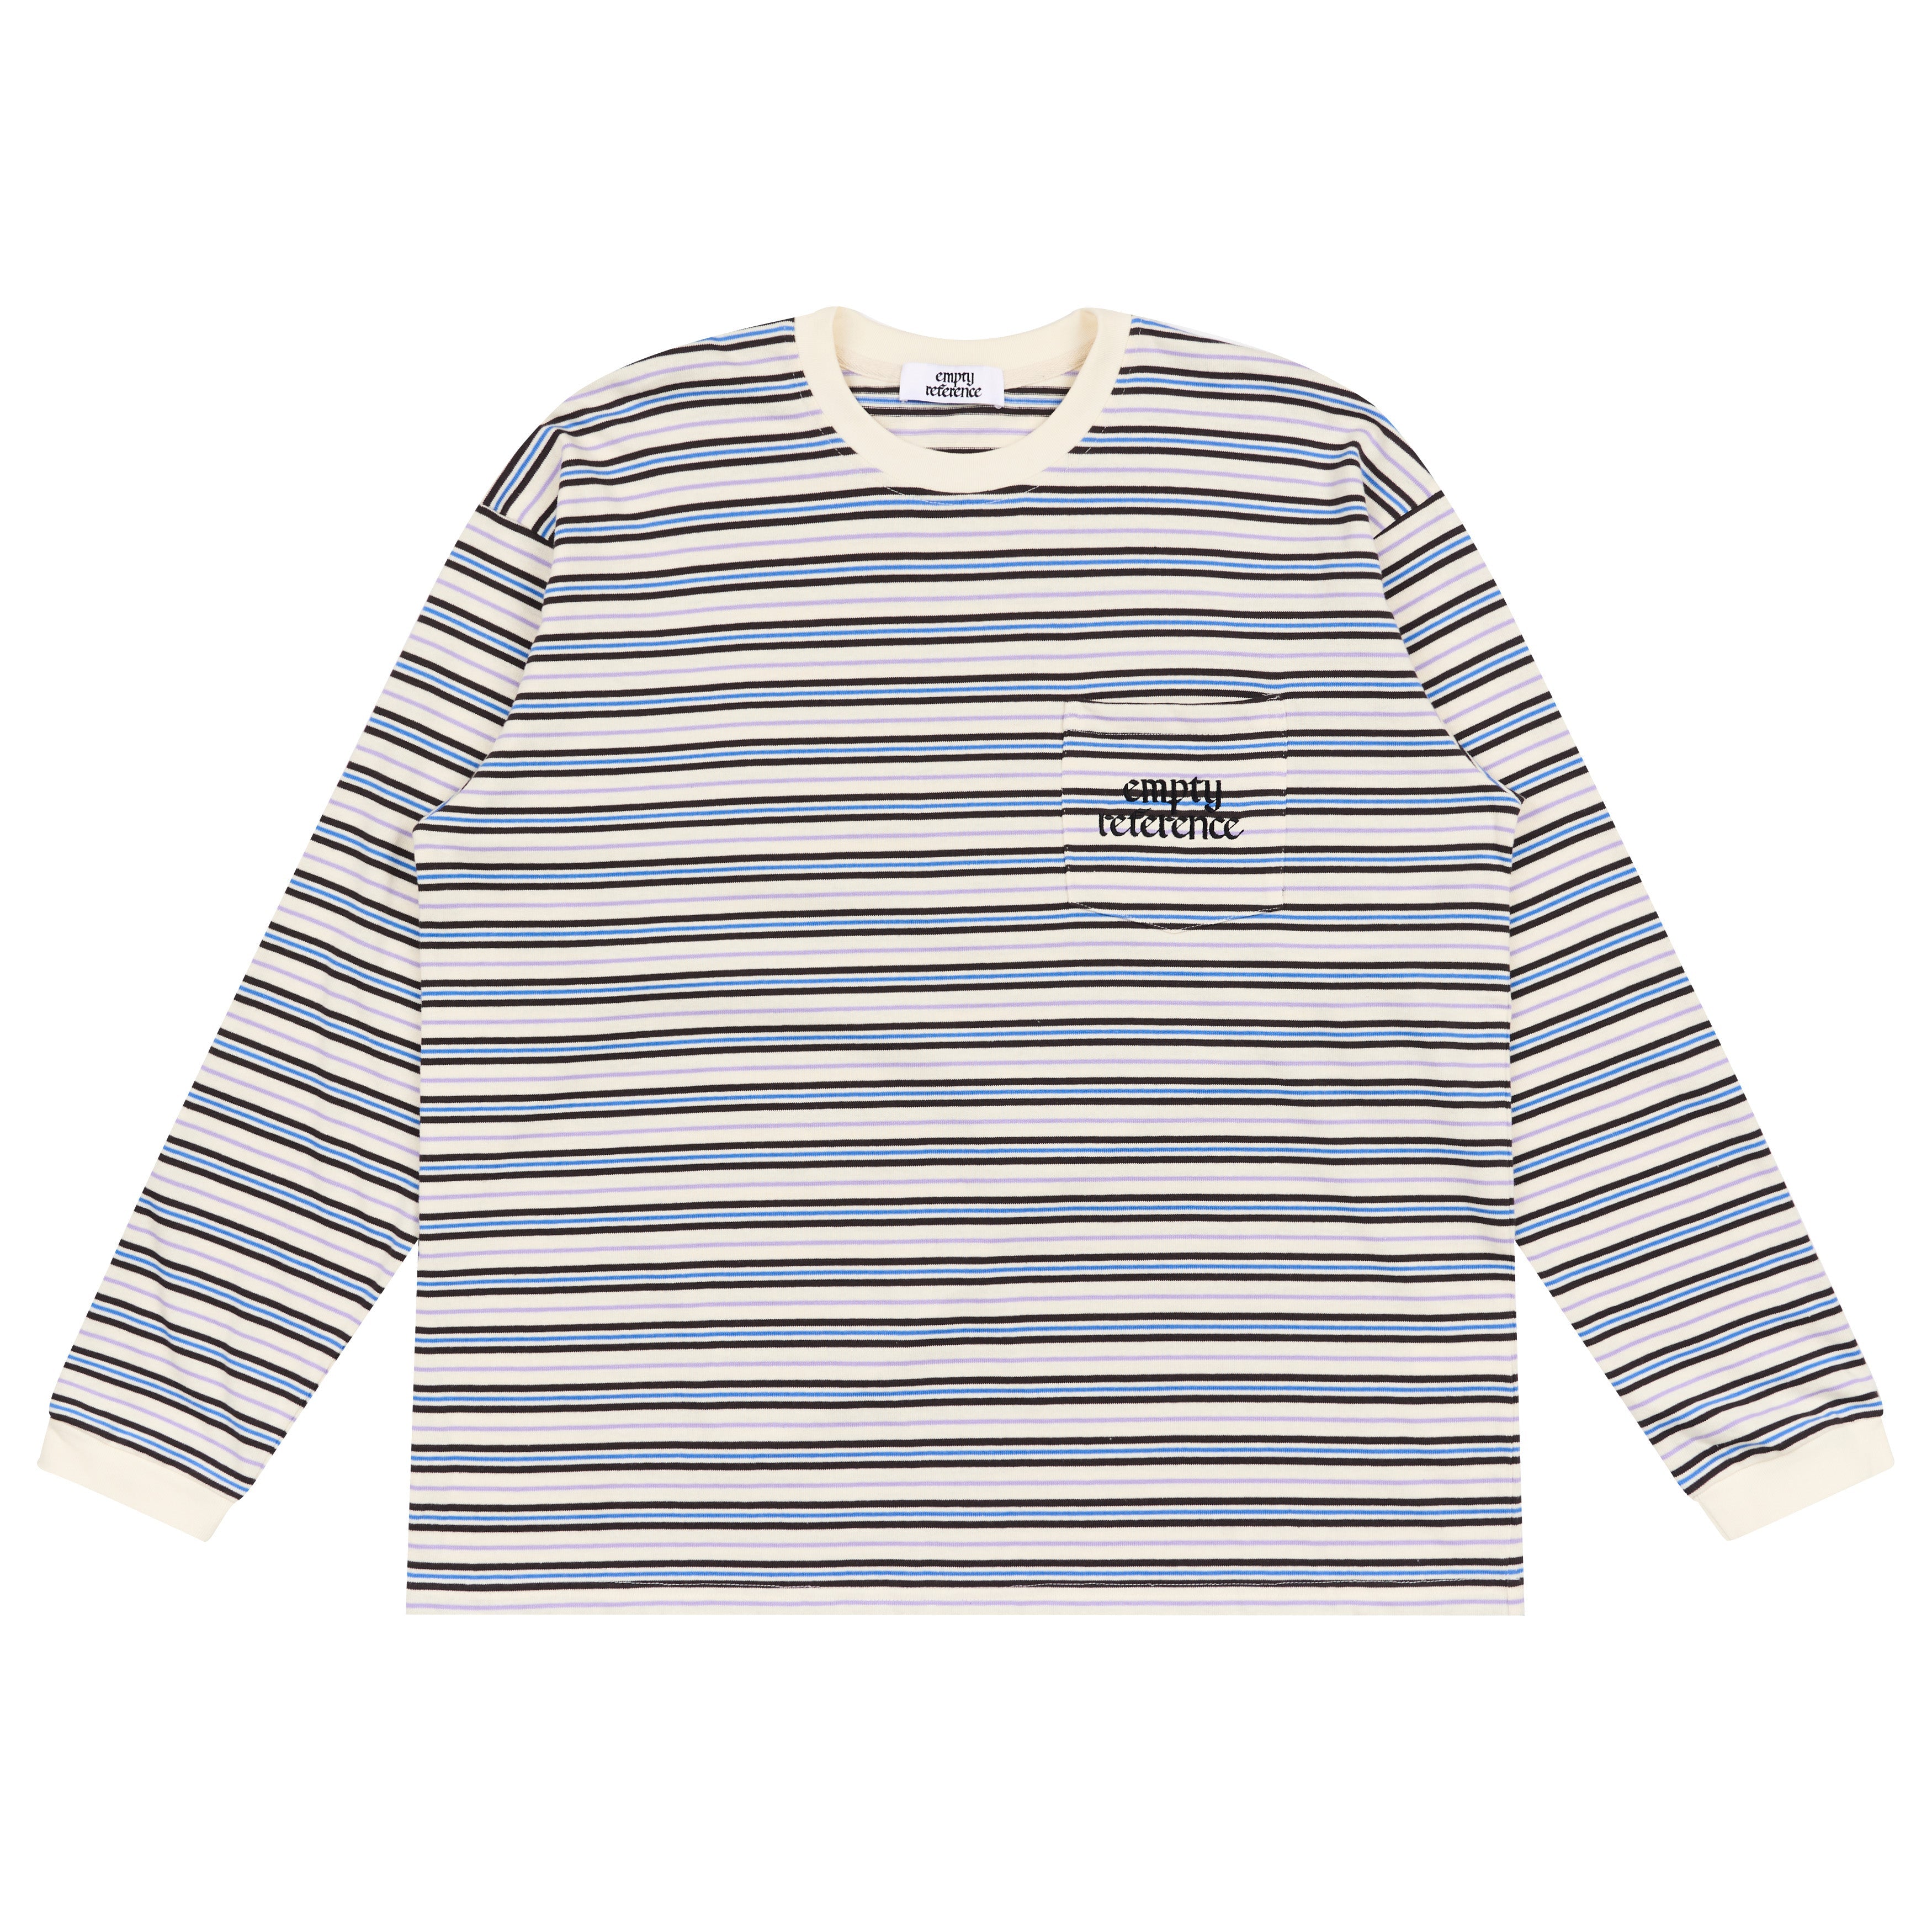 Classic Stripes Embroidered Long Sleeved Tee - chiclara